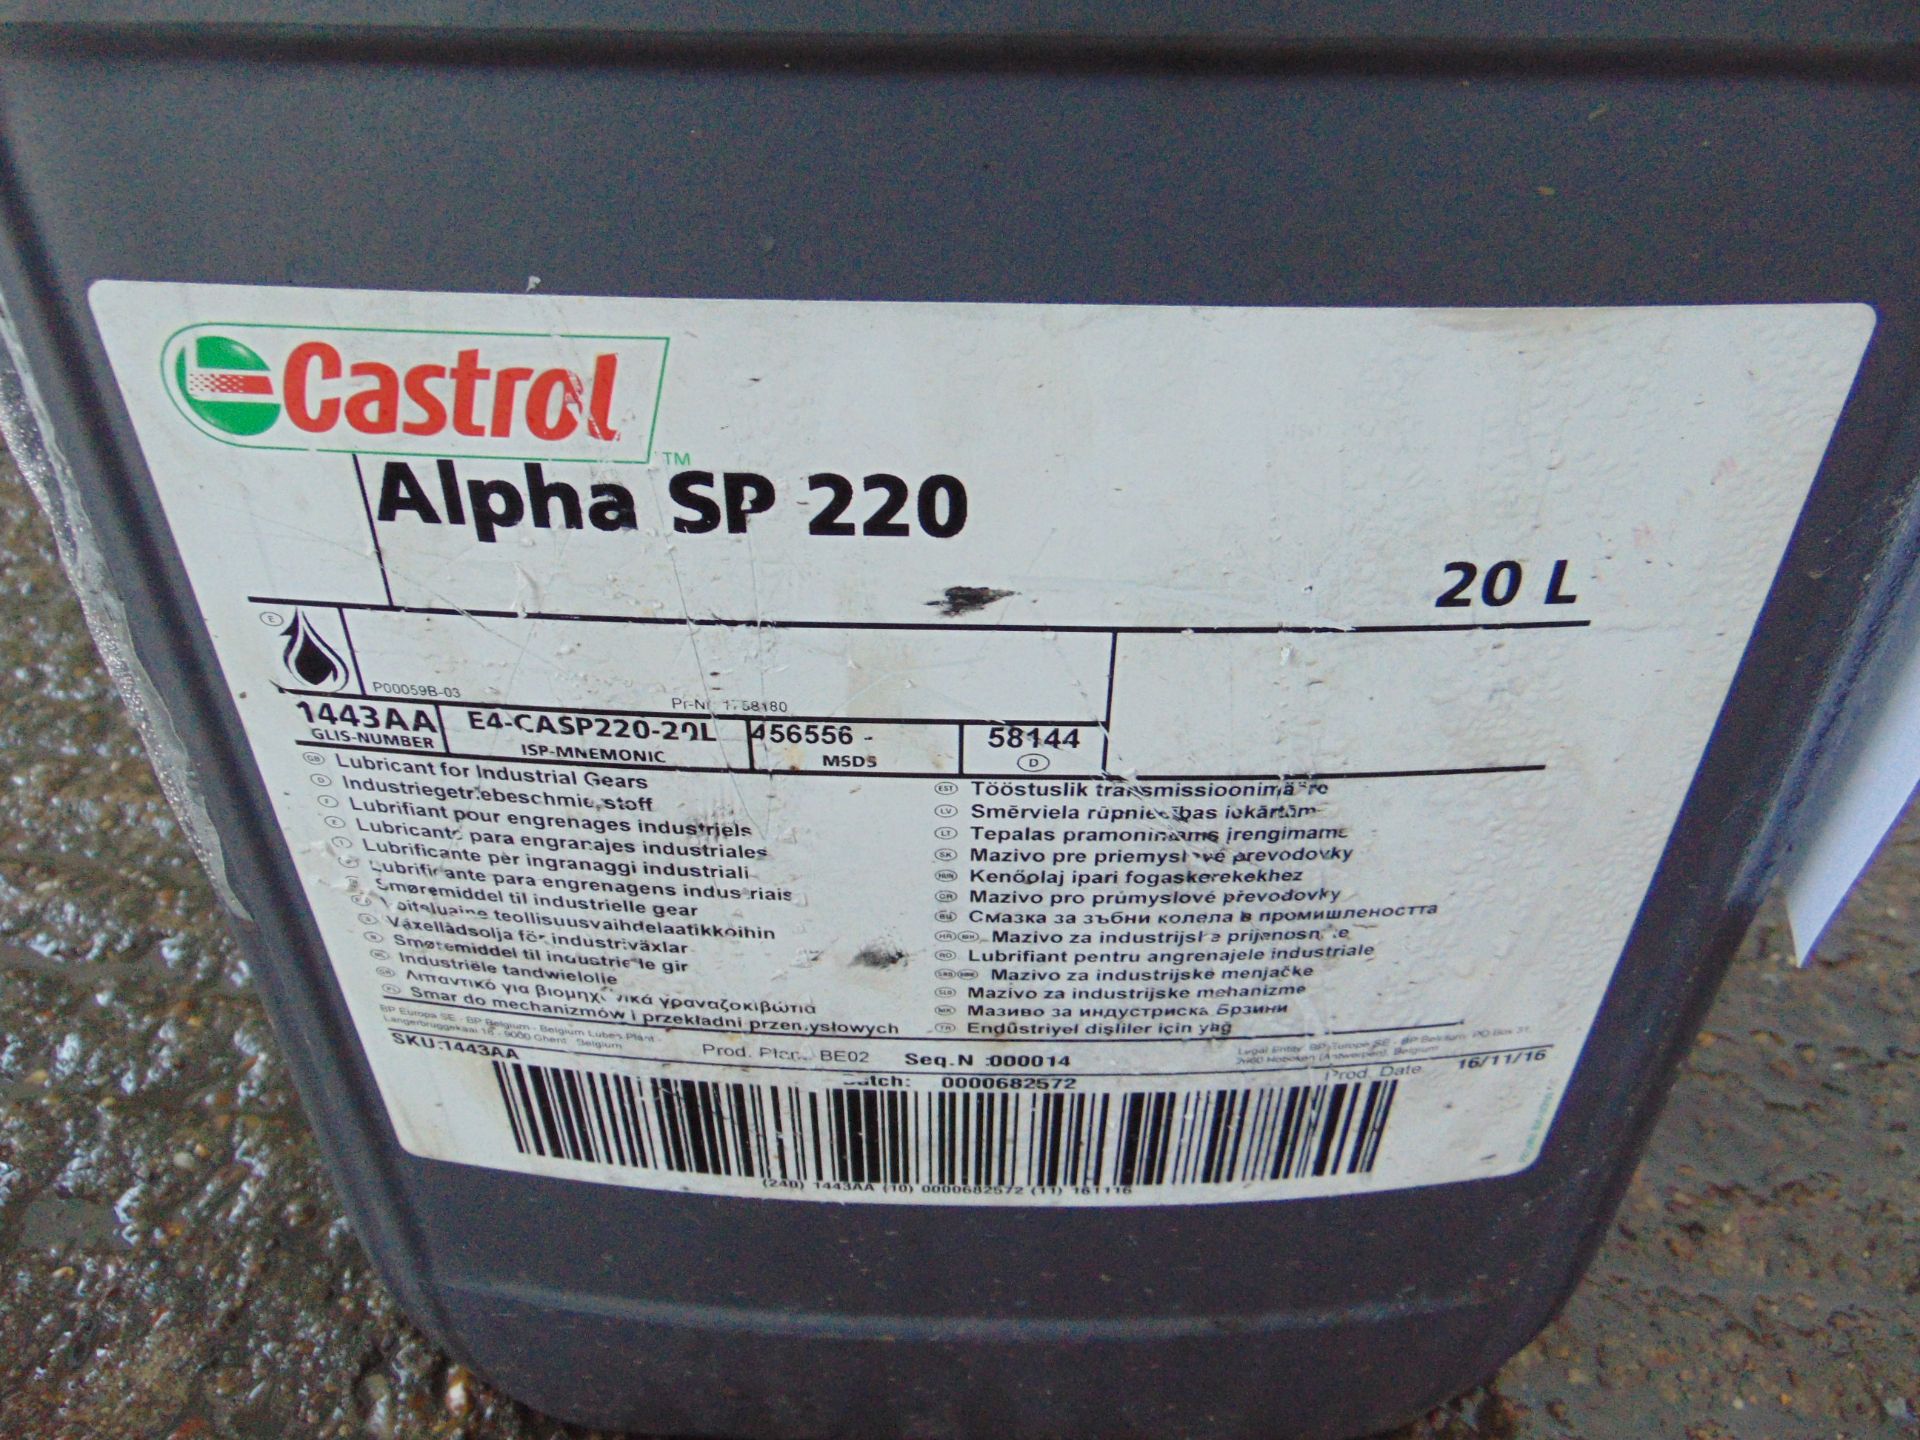 1 x Unissued 20L Drum of Castrol Alpha SP220 High Quality Industrial Gear Oil - Image 2 of 2